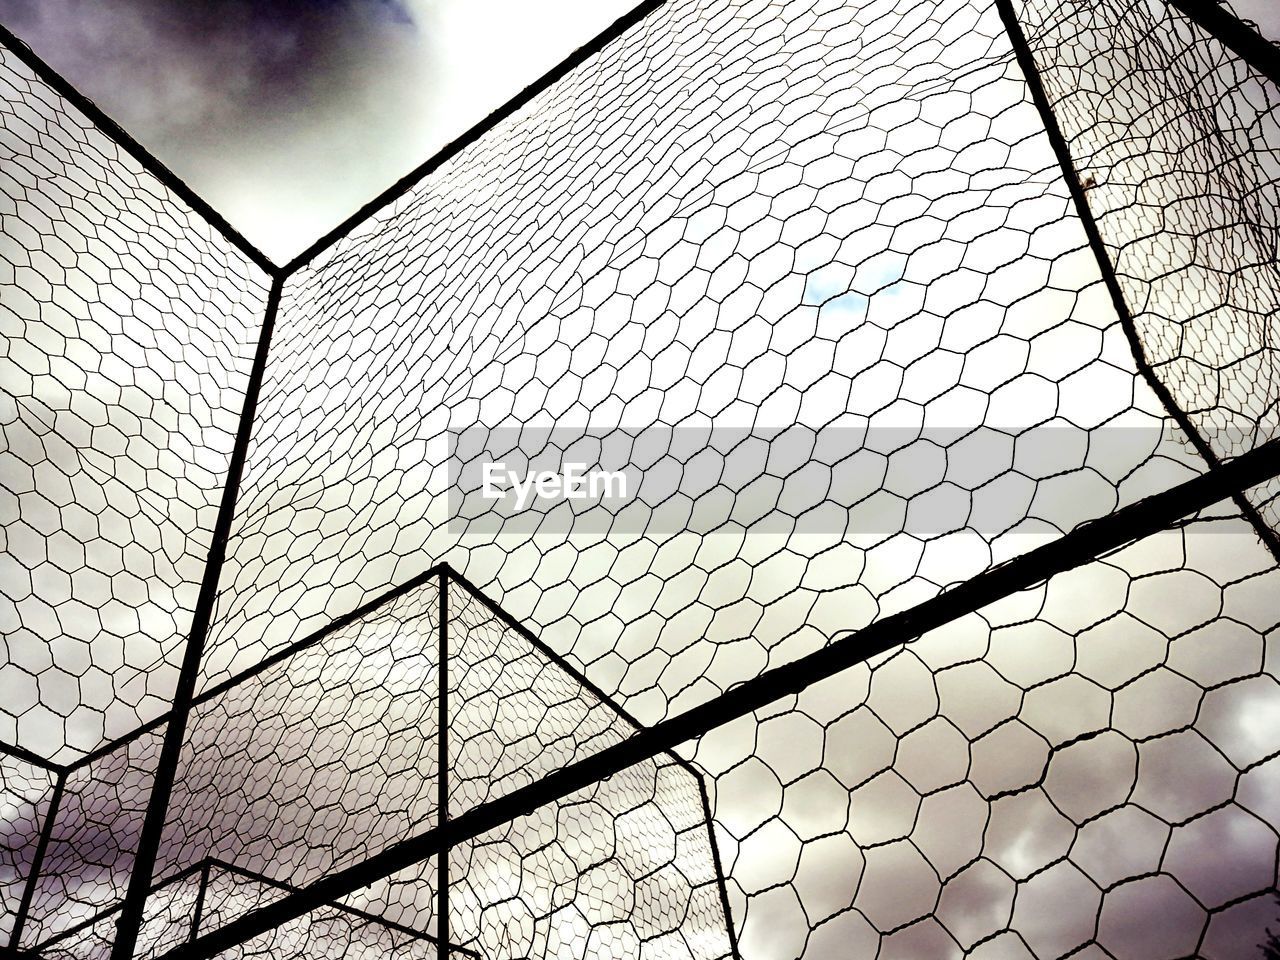 pattern, sky, line, chainlink fence, net, fence, no people, low angle view, built structure, architecture, chain-link fencing, wire fencing, cloud, nature, day, metal, outdoors, sunlight, backgrounds, circle, full frame, security, mesh, building exterior, outdoor structure, wire, protection, shape, wire mesh